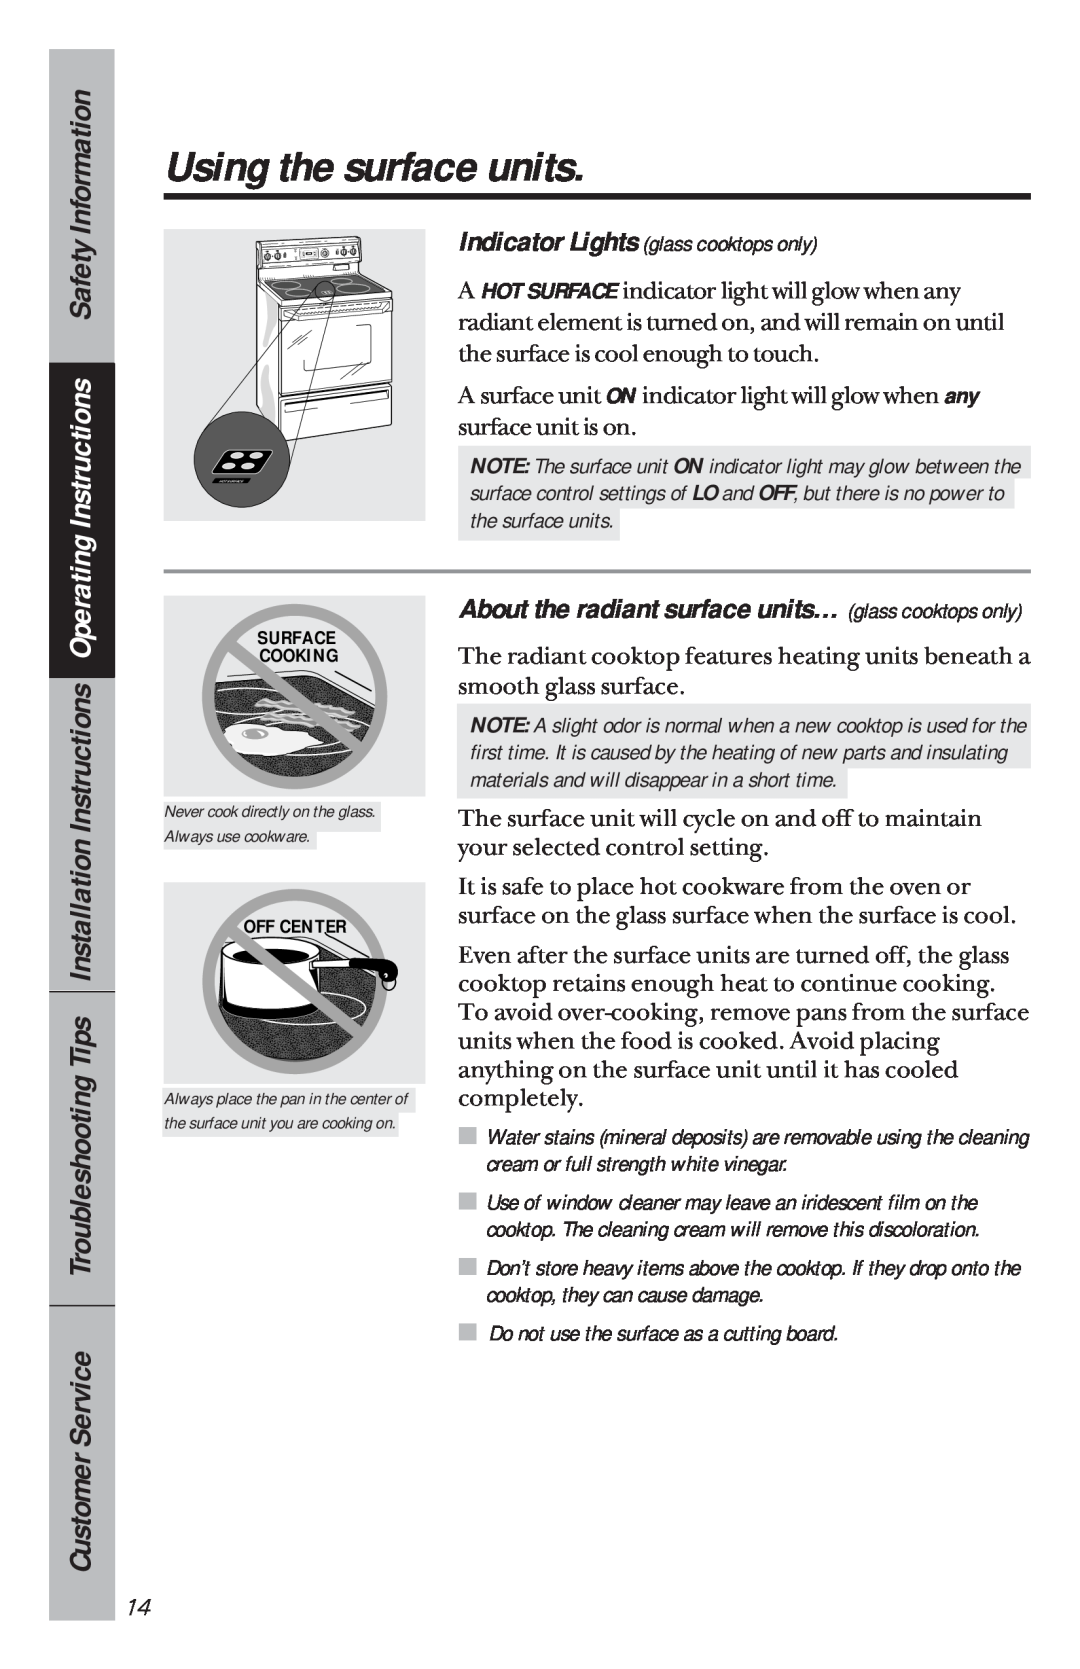 GE 49-8780 Instructions Safety Information, Using the surface units, About the radiant surface units… glass cooktops only 